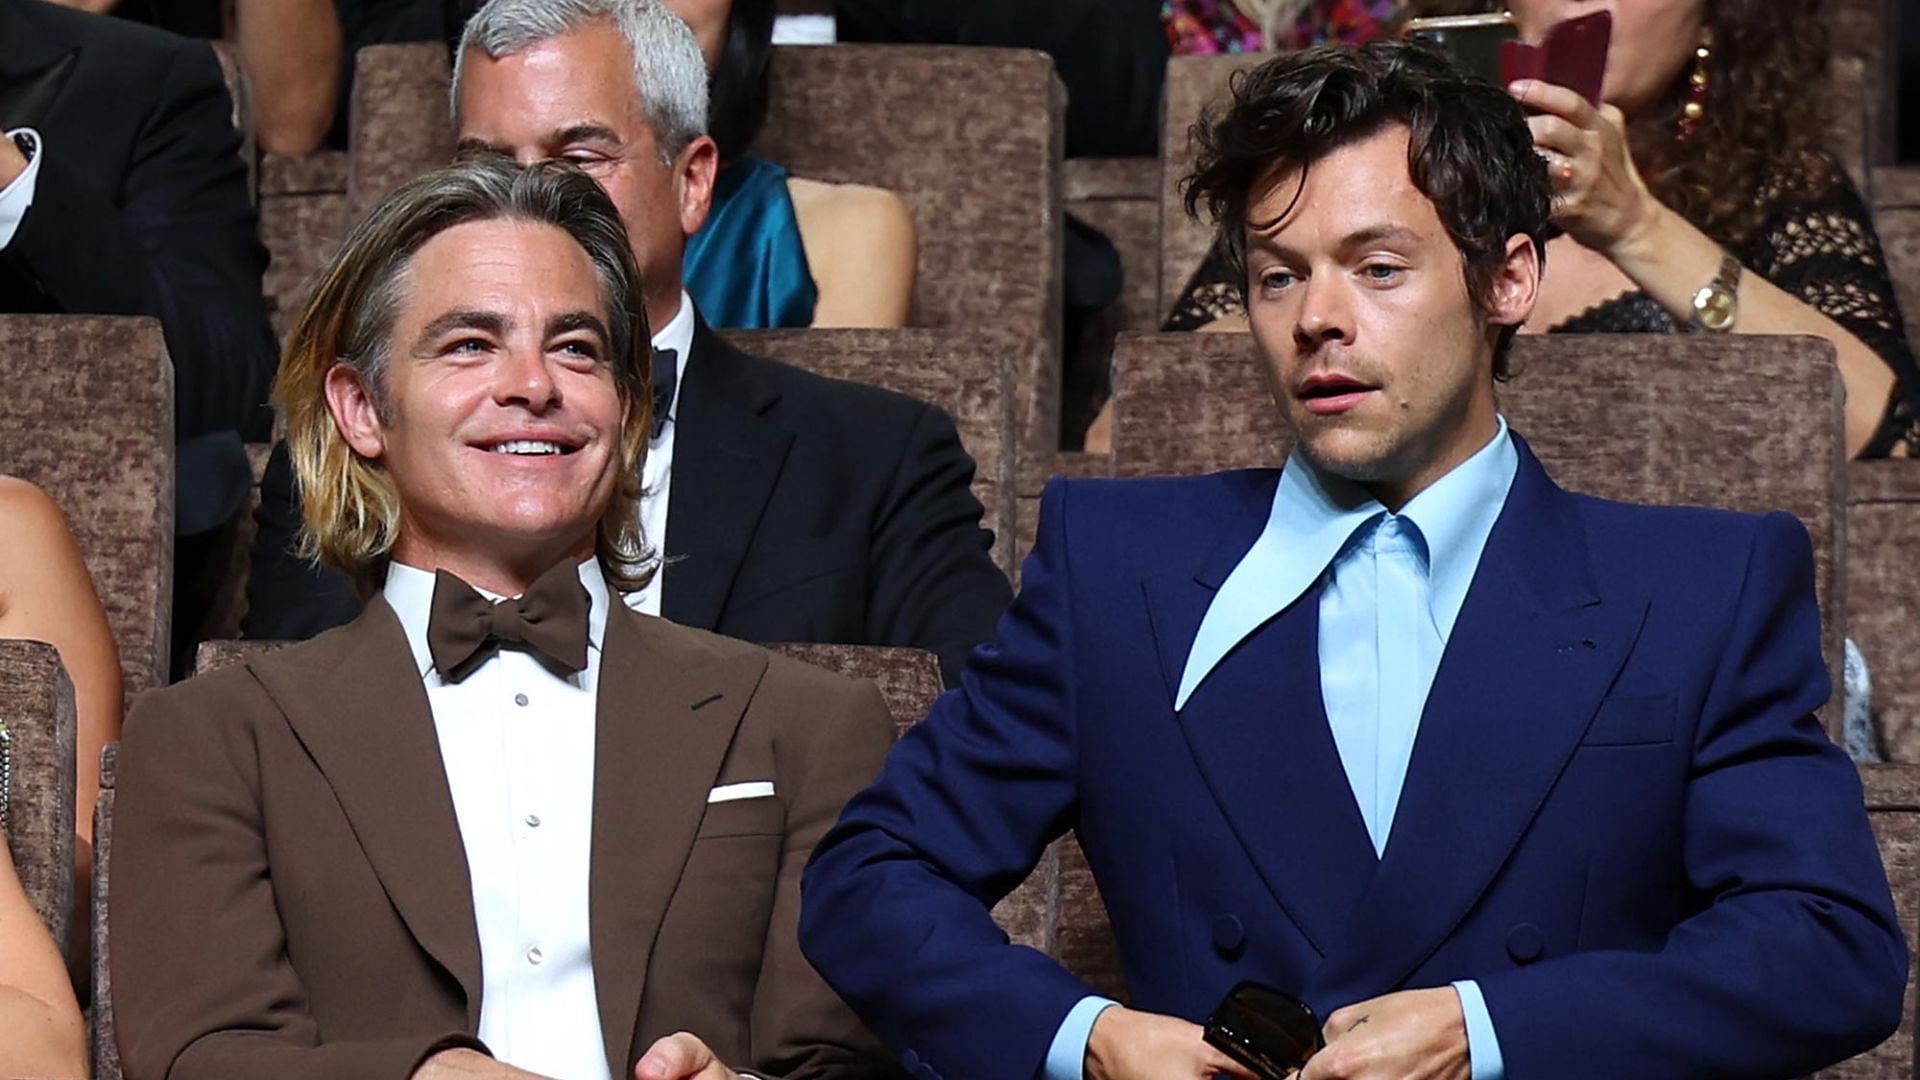 Harry Styles and Chris Pine at the Venice Film Festival (Image via Entertainment Weekly)